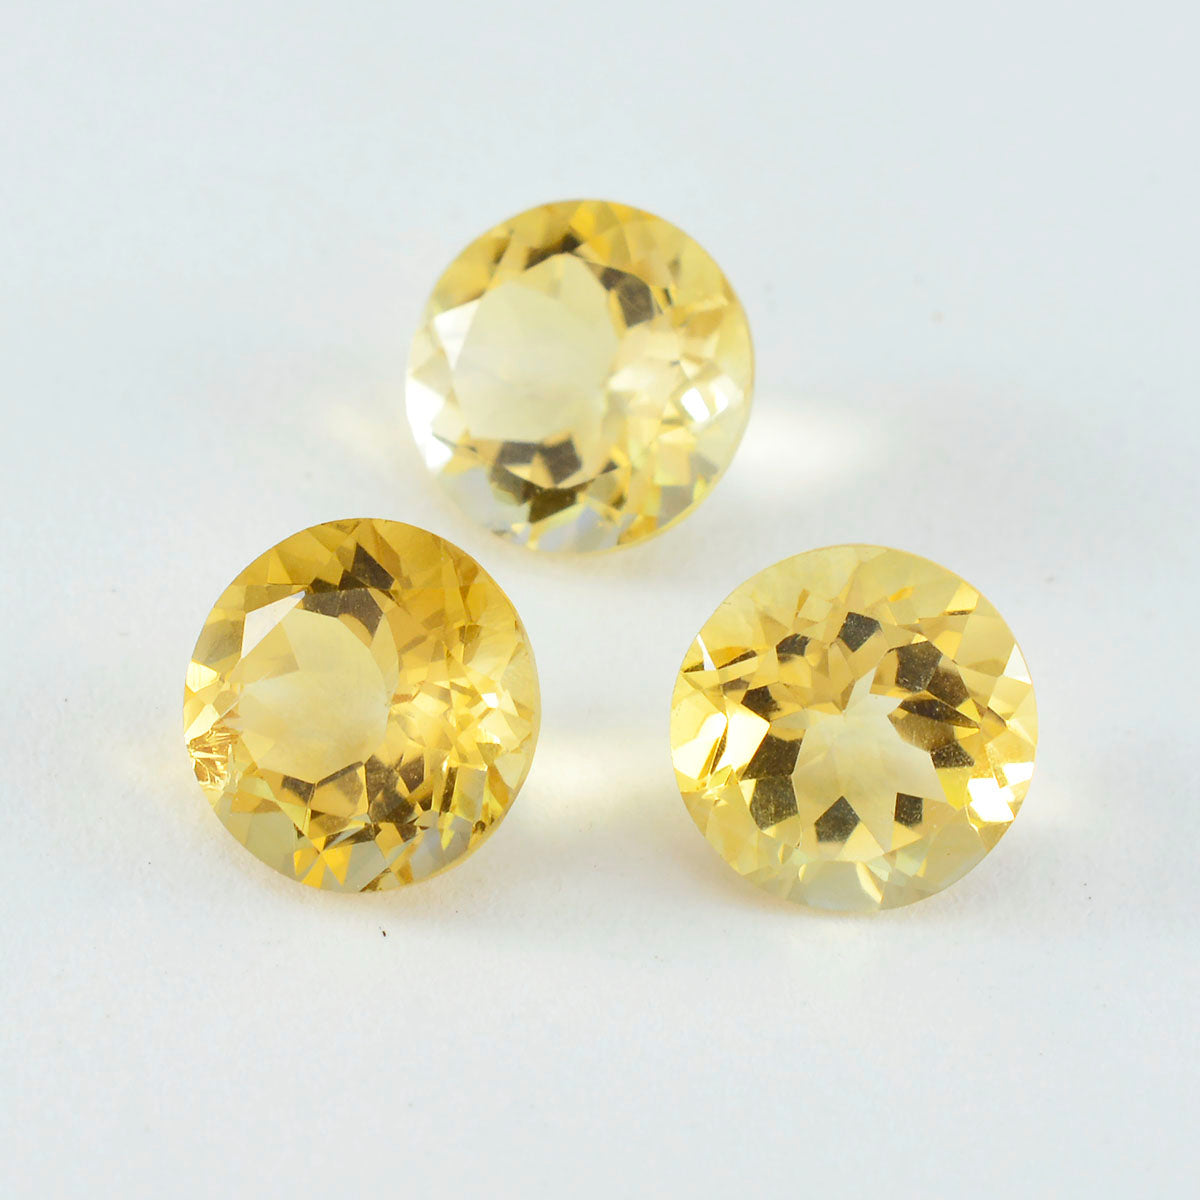 Riyogems 1PC Genuine Yellow Citrine Faceted 9x9 mm Round Shape AAA Quality Loose Gem